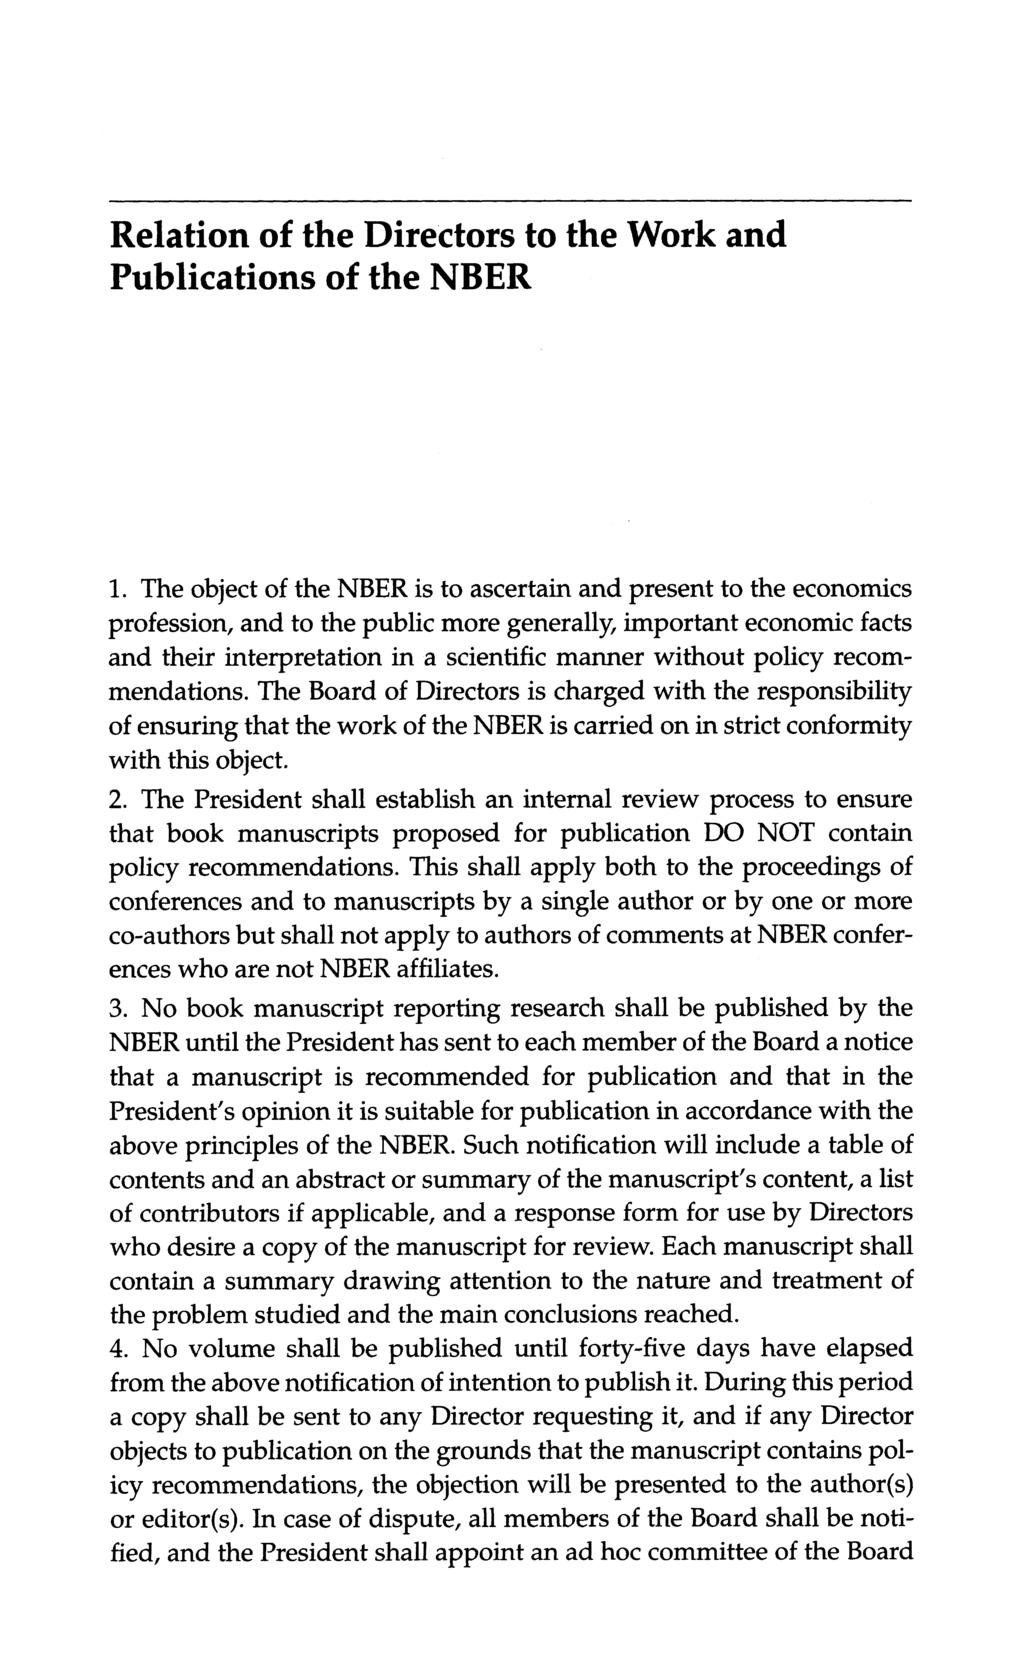 Relation of the Directors to the Work and Publications of the NBER 1.